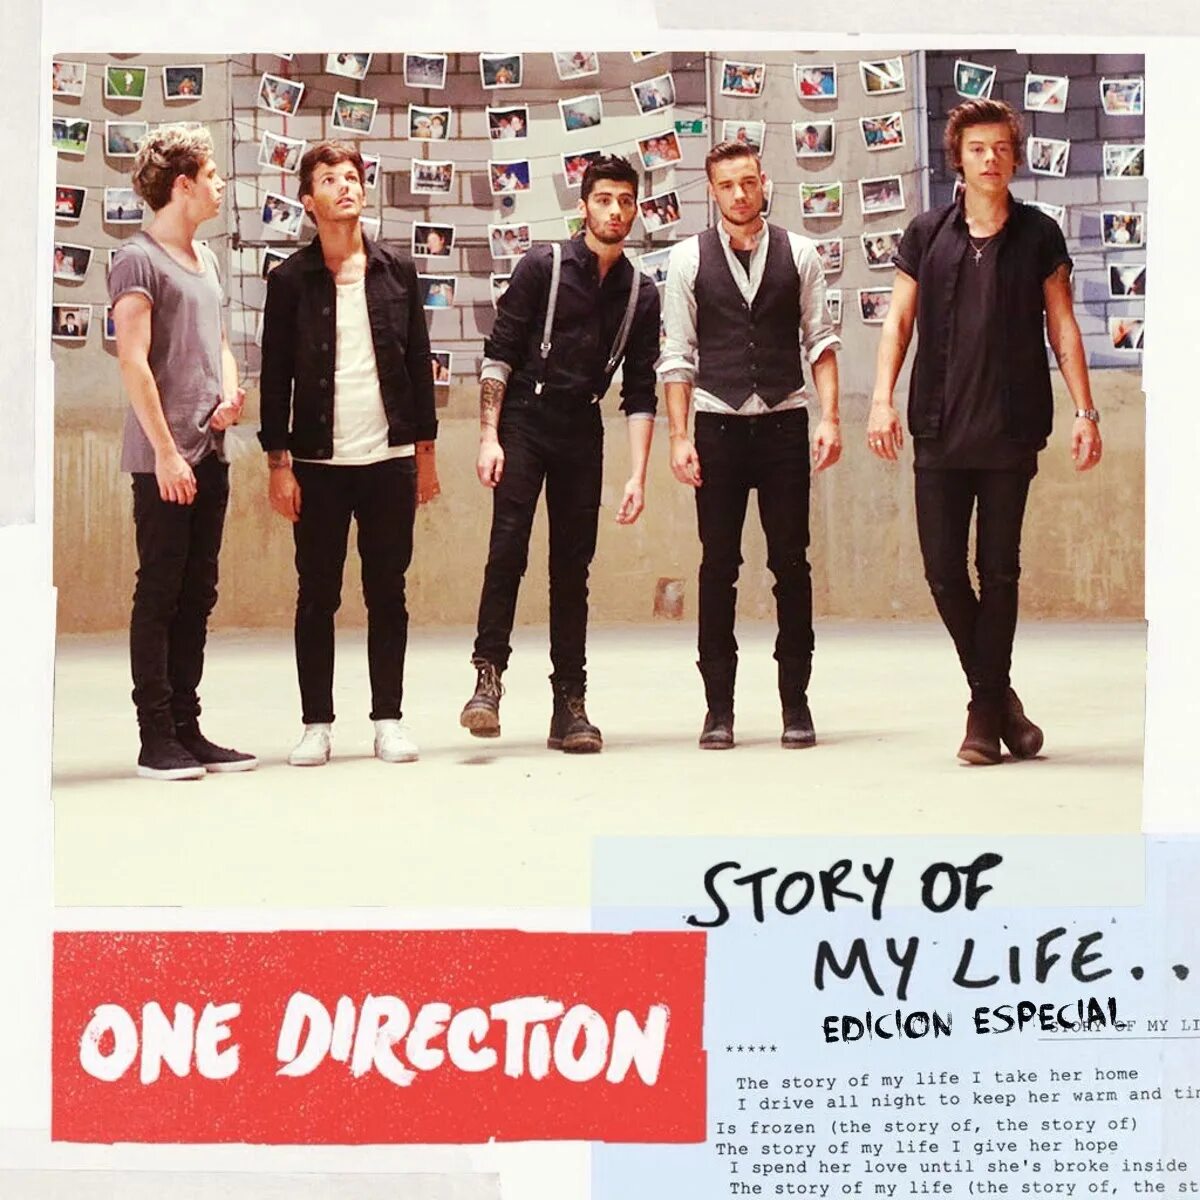 One Direction story of my Life обложка. The story of my Life. Story of my Life one Direction текст. Песня story of my Life.